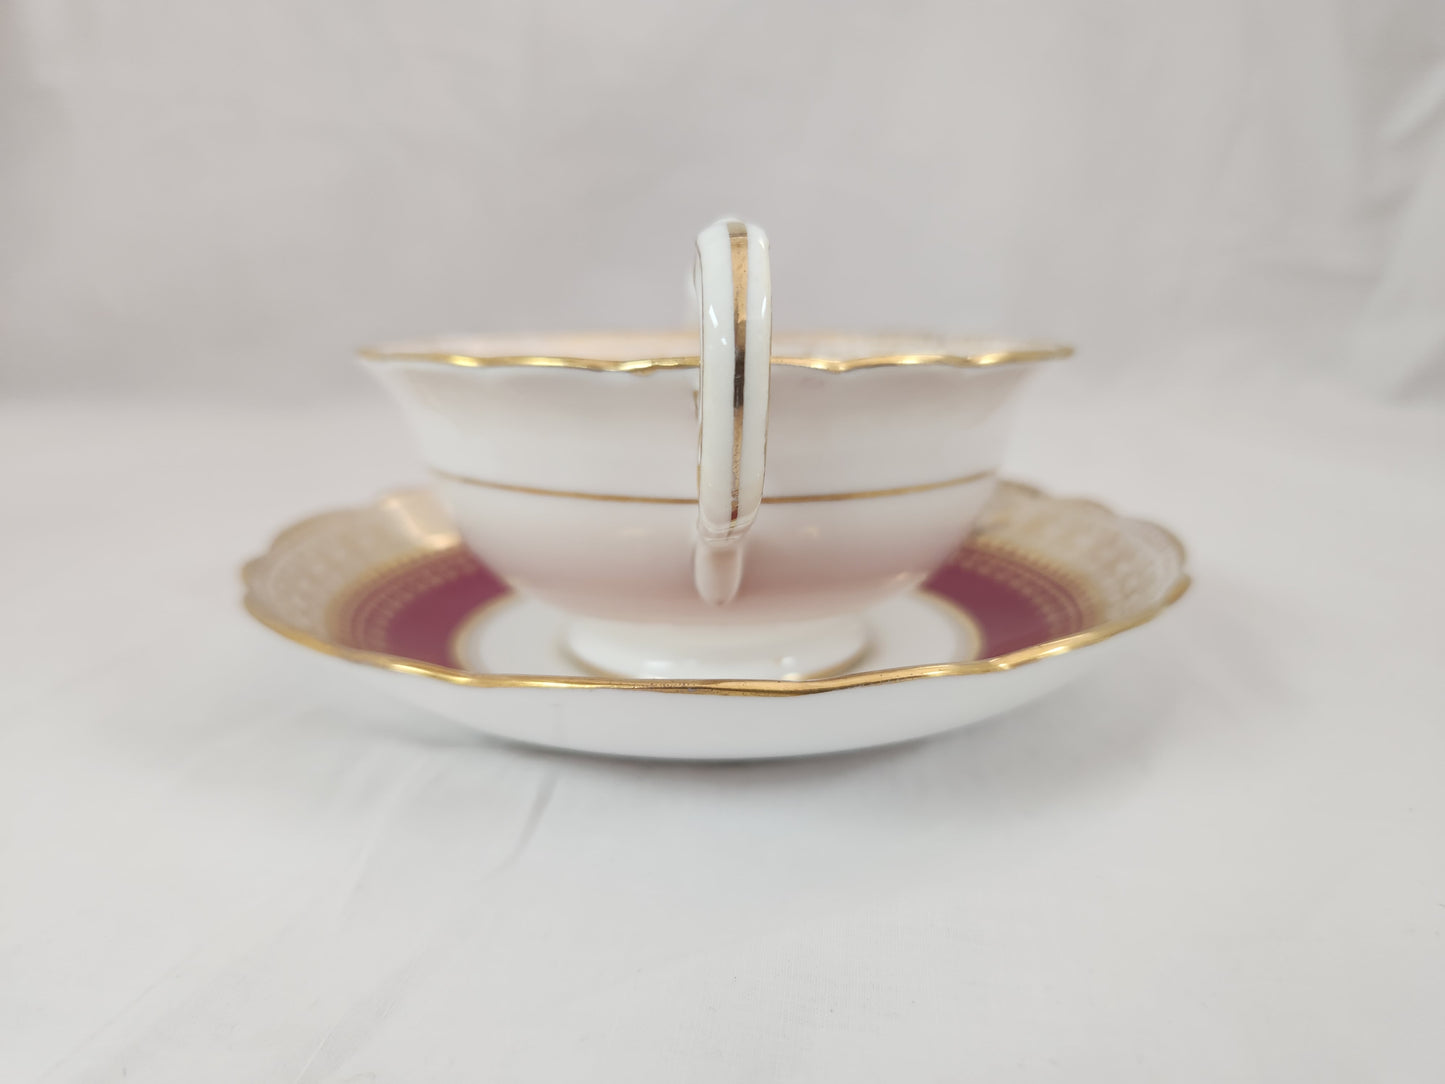 VTG - Gold Encrusted Scalloped Rim Footed Soup Bowl W/Saucer #6692 by Aynsley